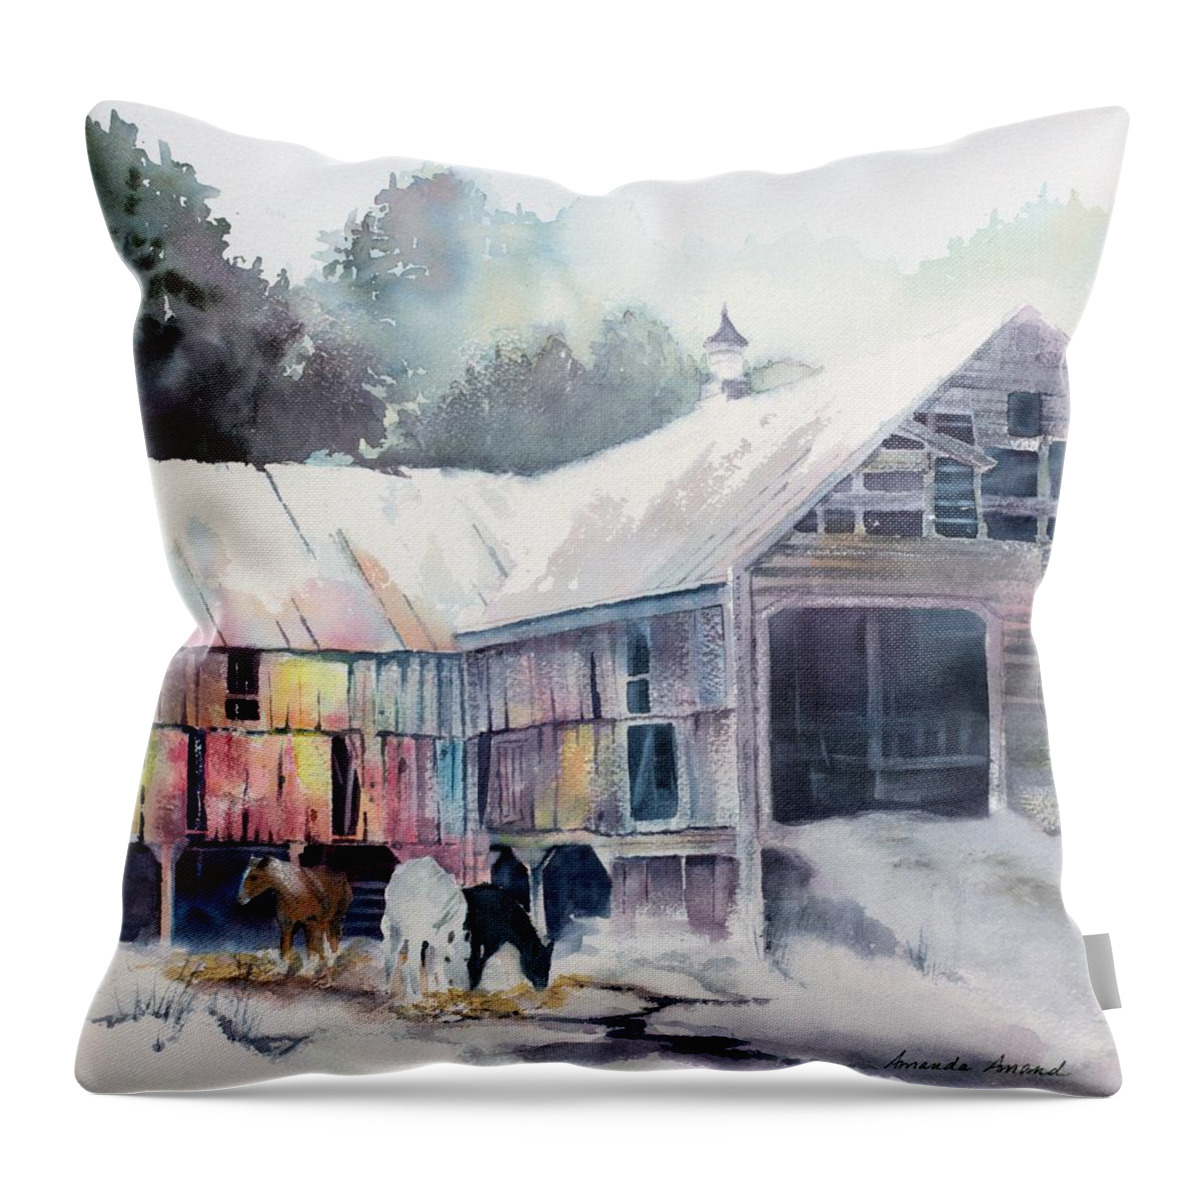 Vermont Throw Pillow featuring the painting Bradford Light by Amanda Amend